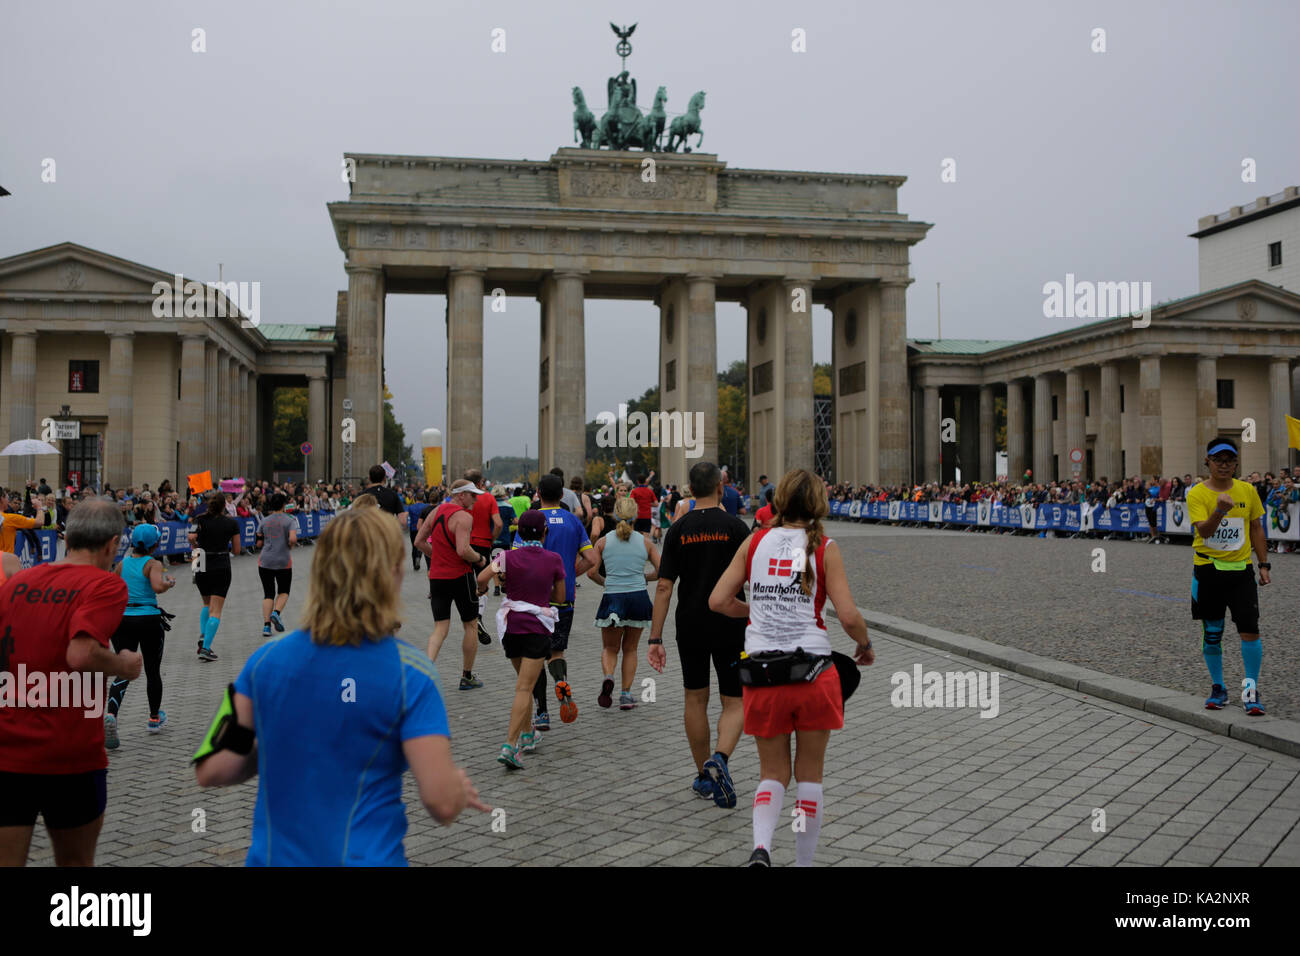 Berlin, Germany. 24th September 2017. Runners are on the last kilometre of the marathon on the Unter den Linden boulevard and run towards the Brandenburg Gate. More than 43,000 runners from 137 nations took to the streets of Berlin to participate in the 44th BMW Berlin Marathon. Credit: Michael Debets/Alamy Live News Stock Photo